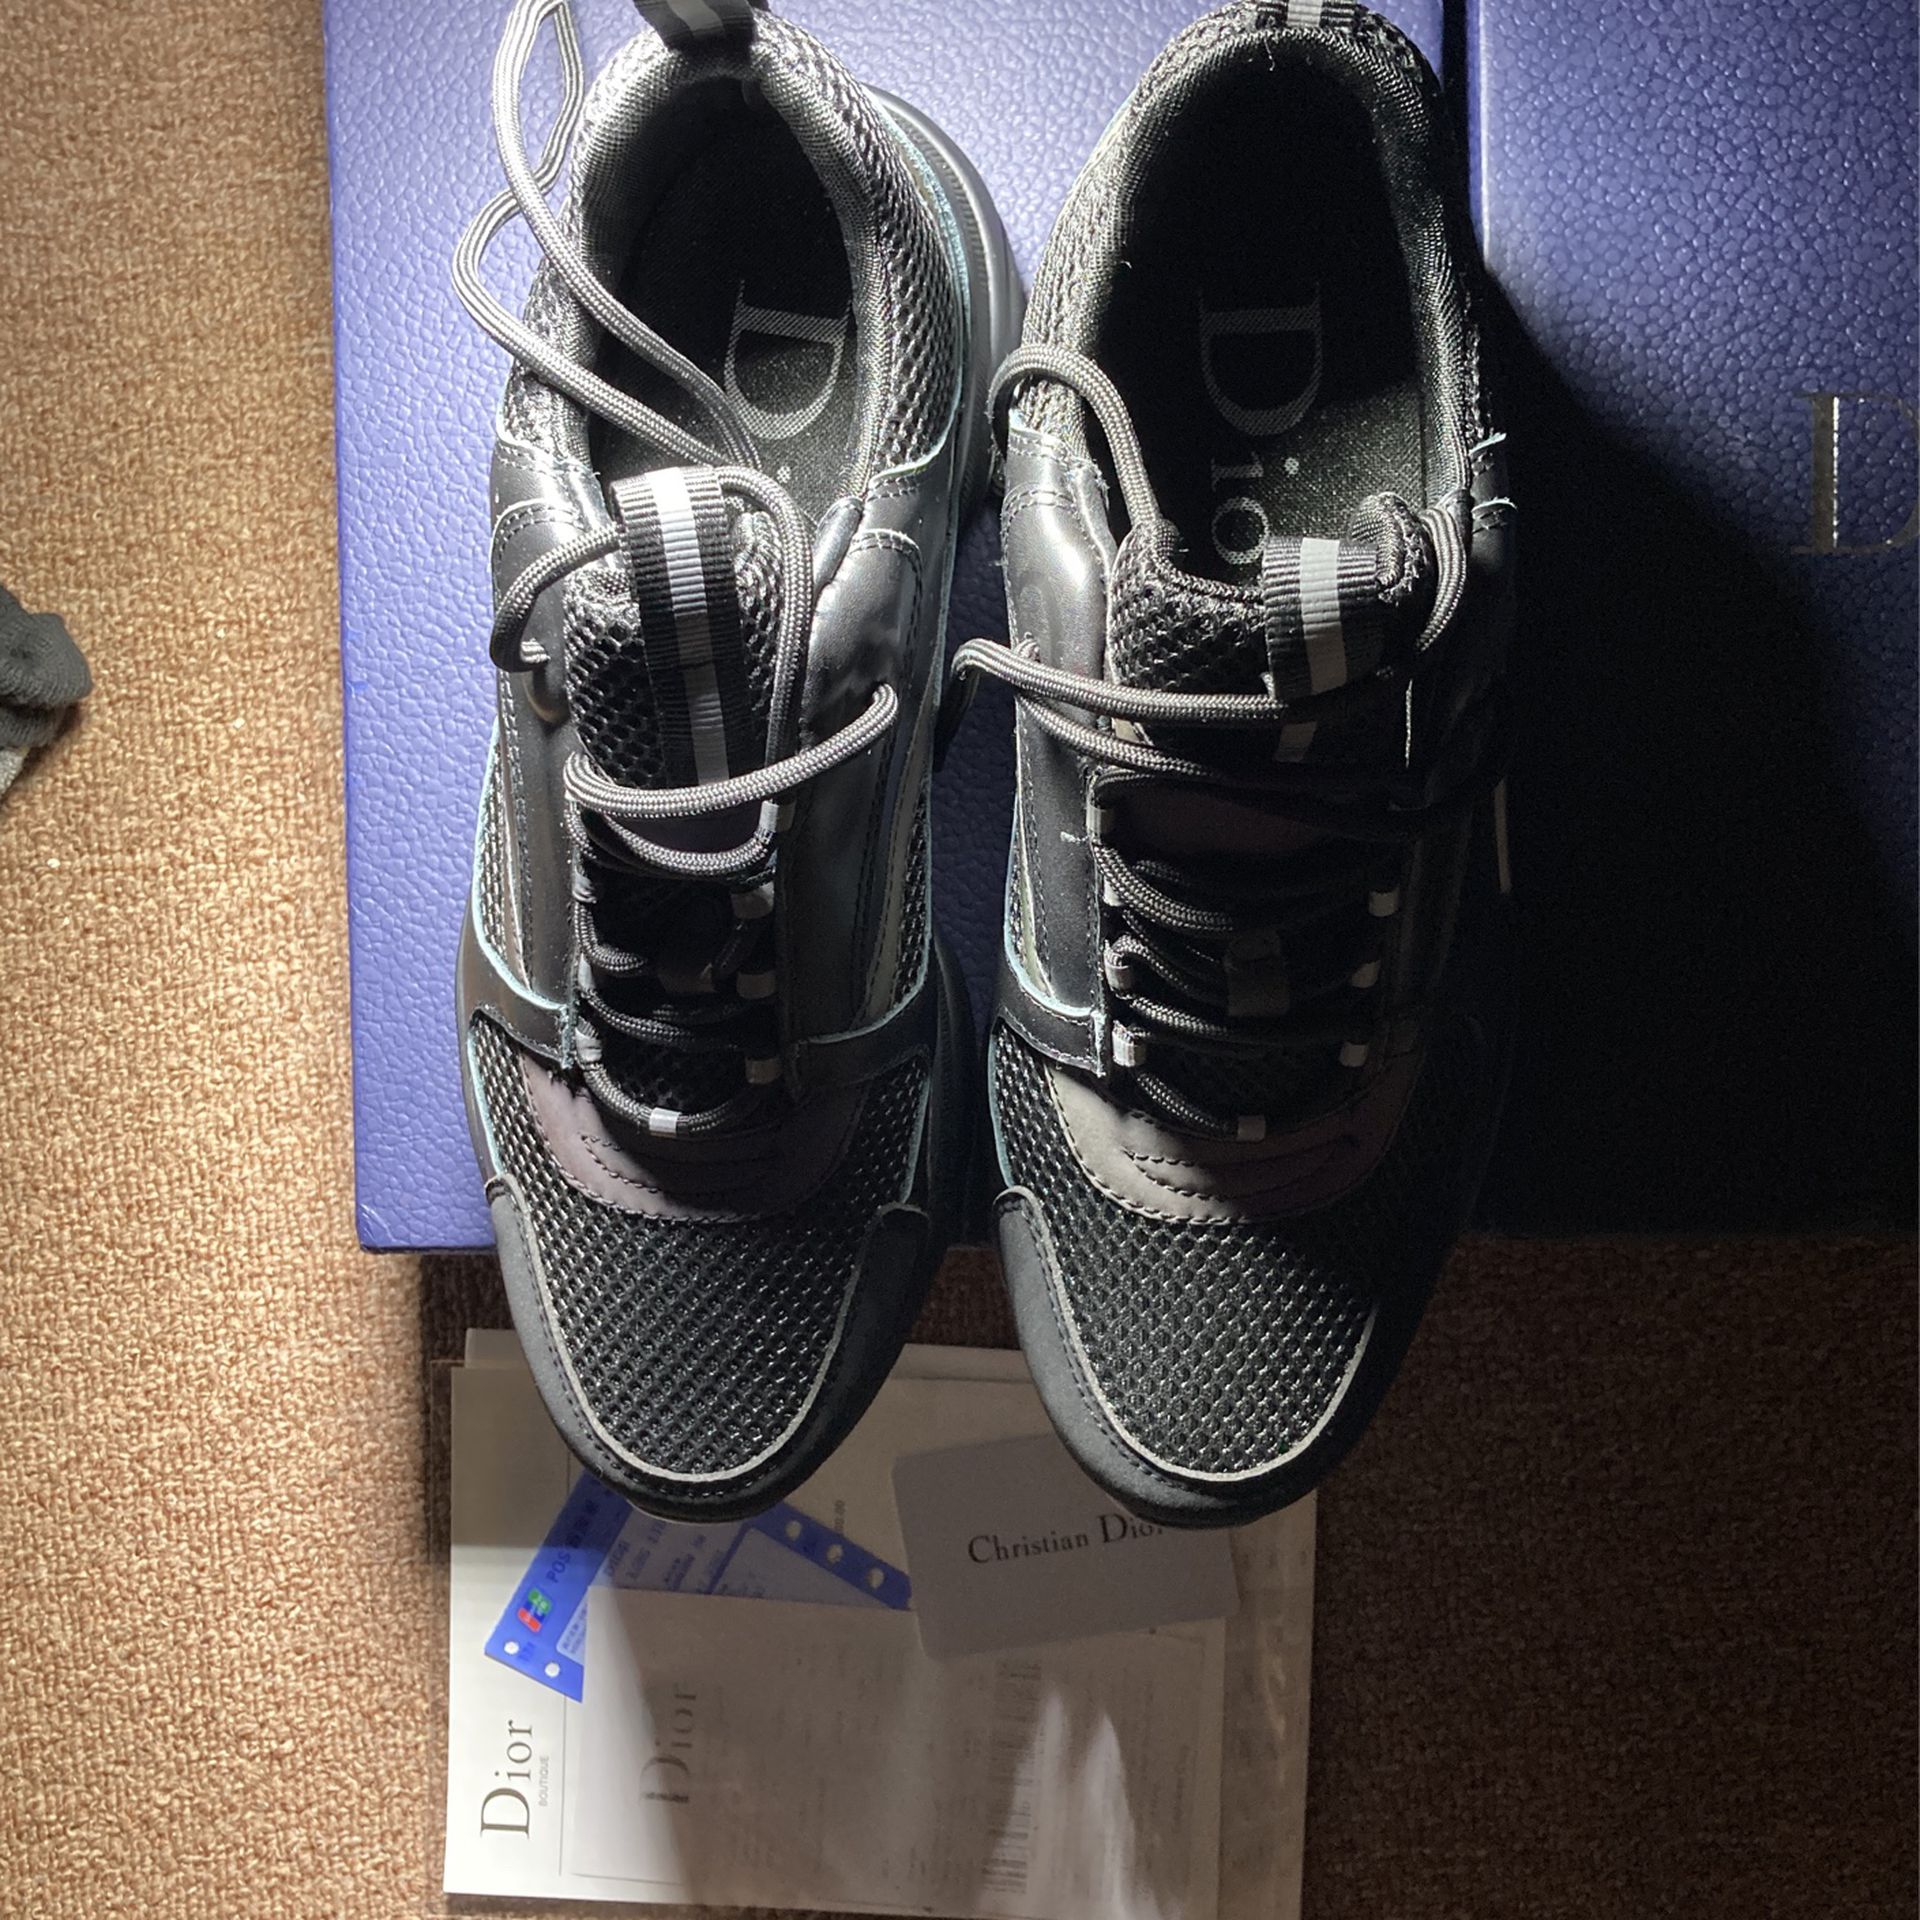 B22 Reflective Dior Shoes for Sale in Buckeye, AZ - OfferUp